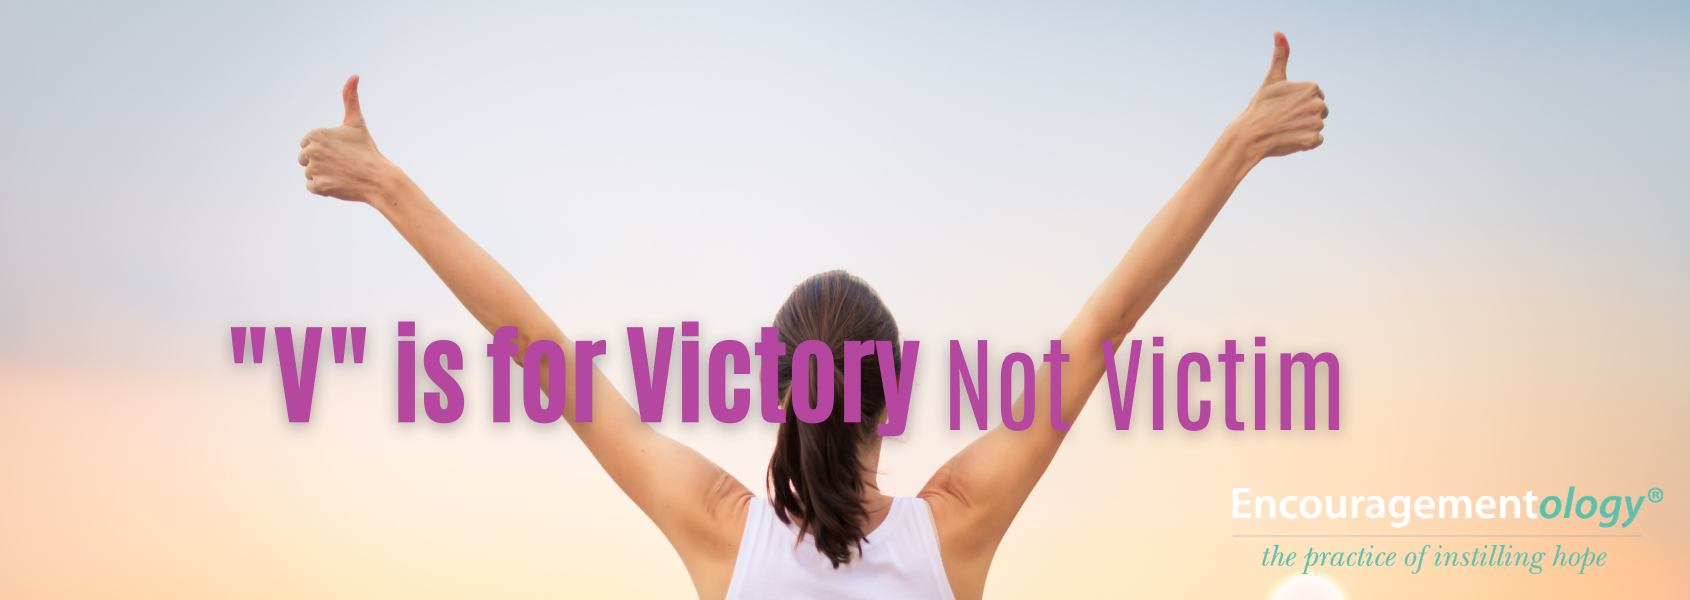 V is for Victory Not Victim